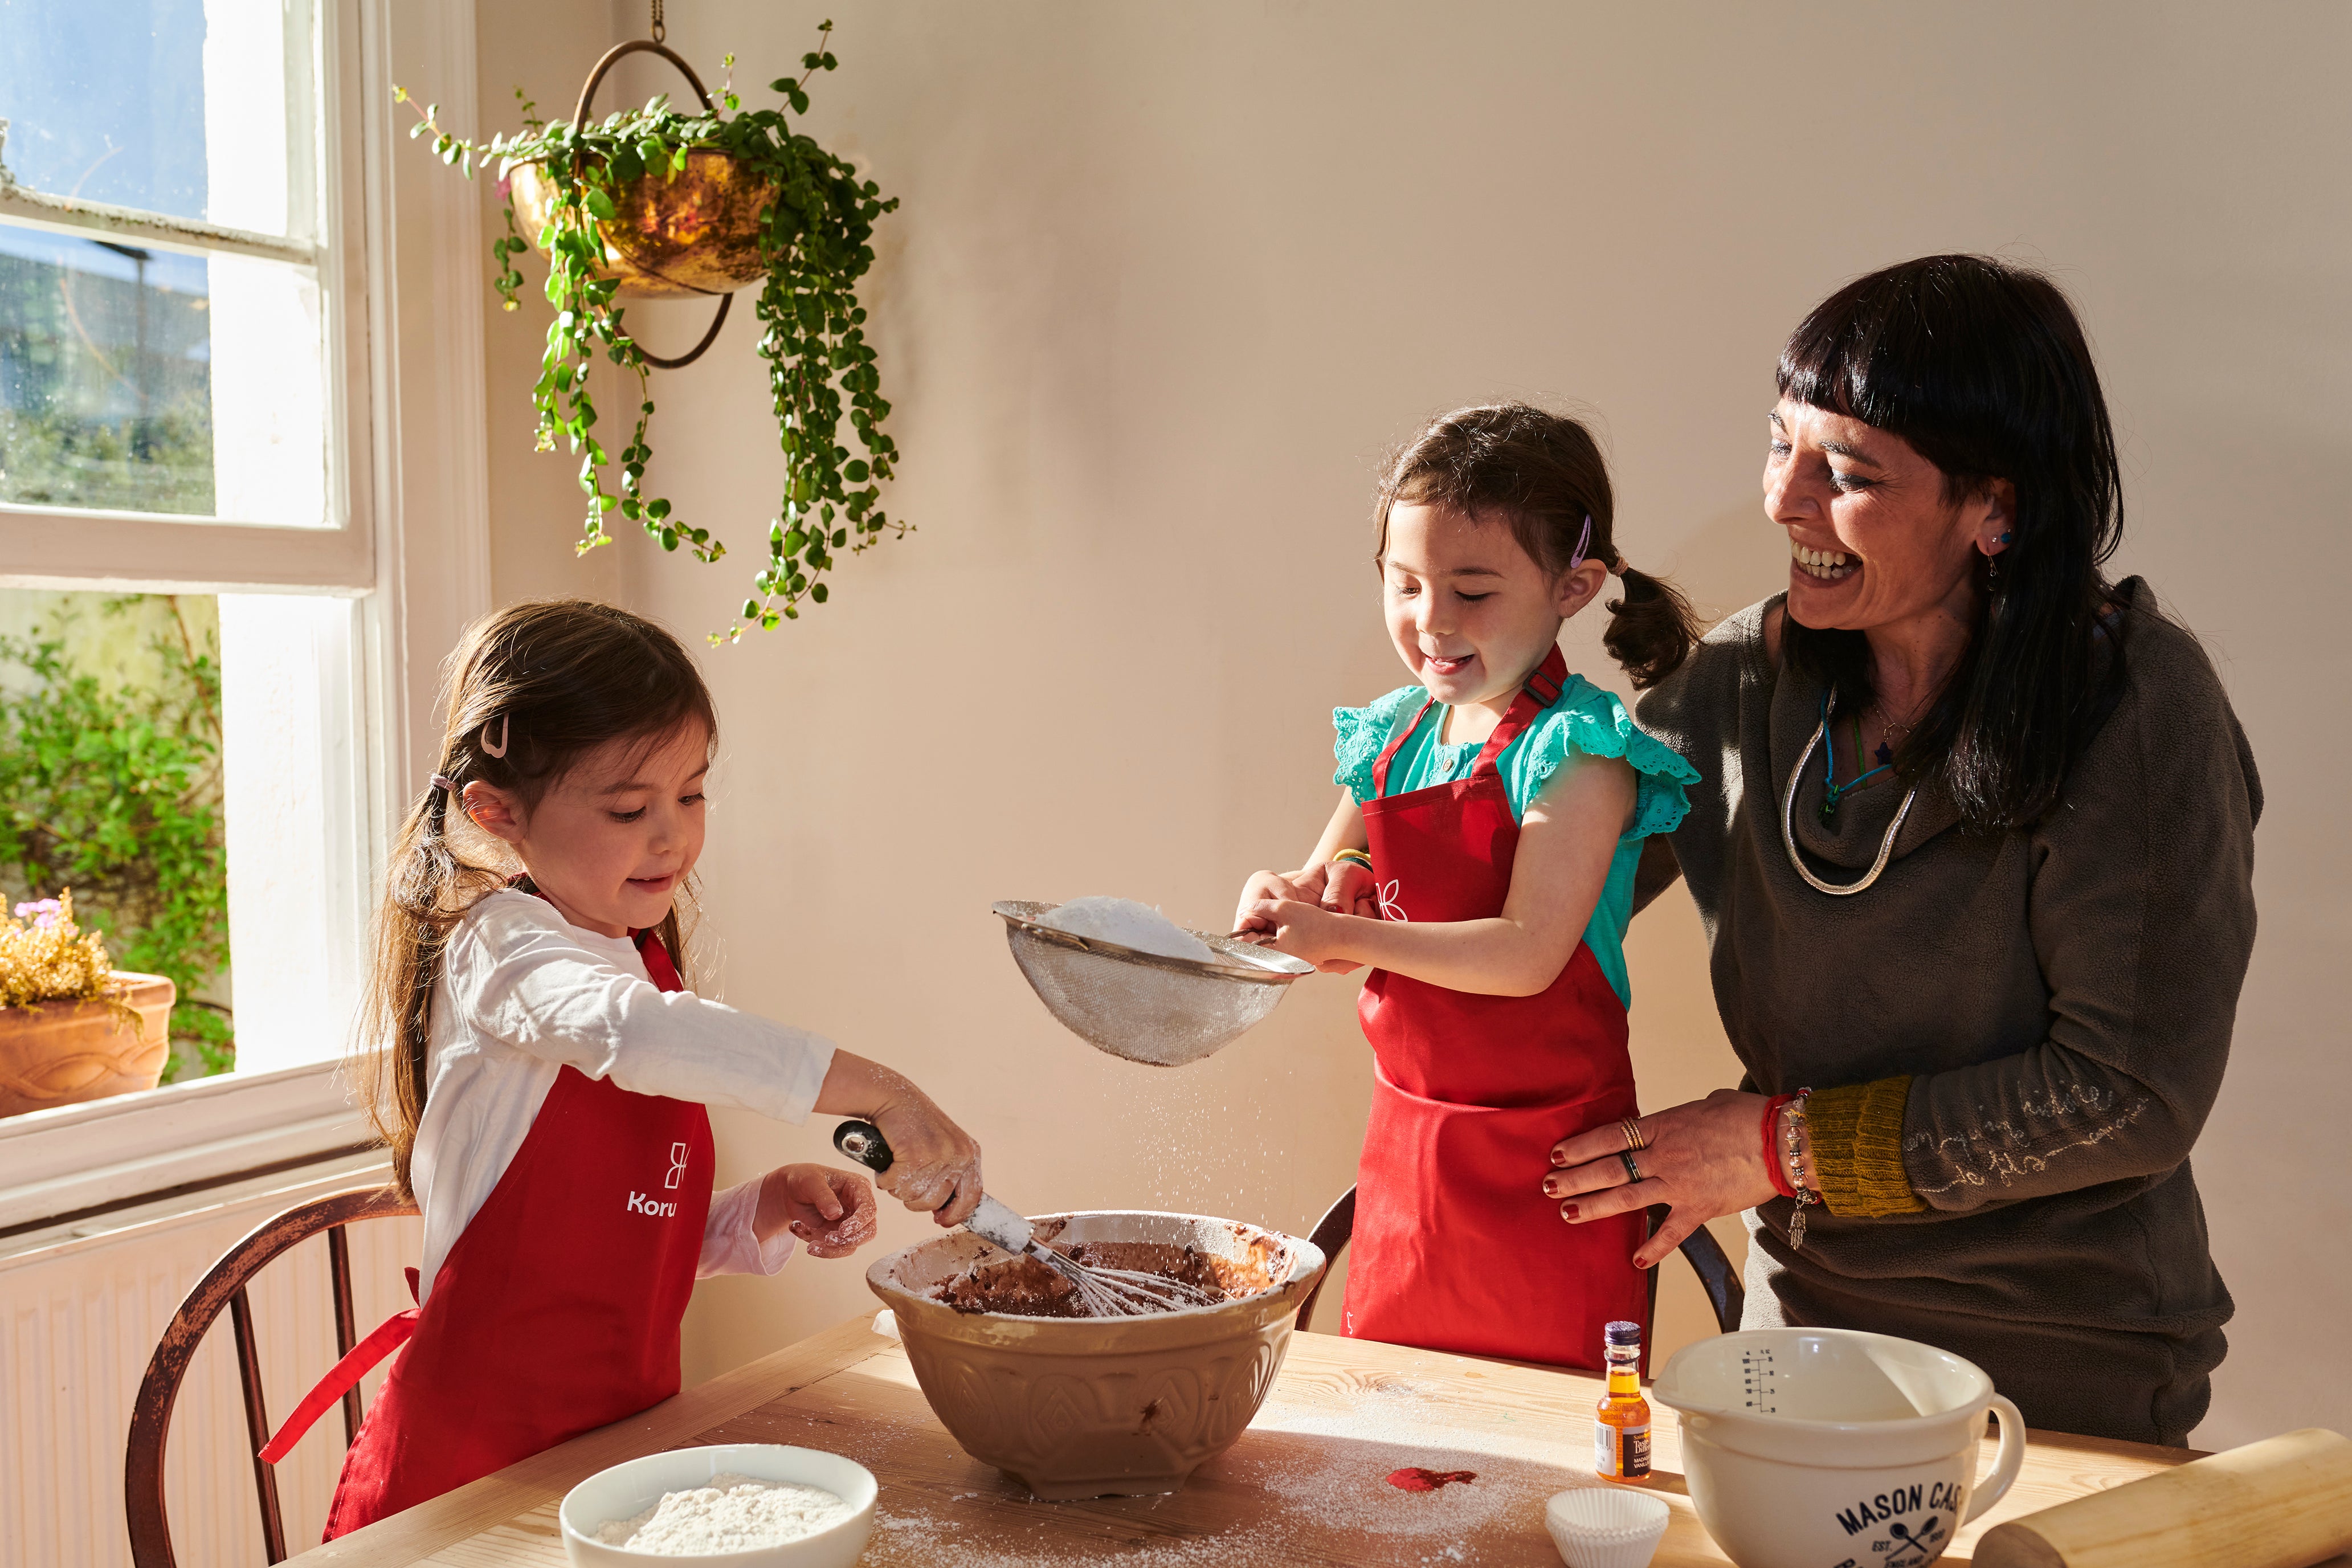 Baking with kids can help them learn over the summer (Koru Kids/PA)